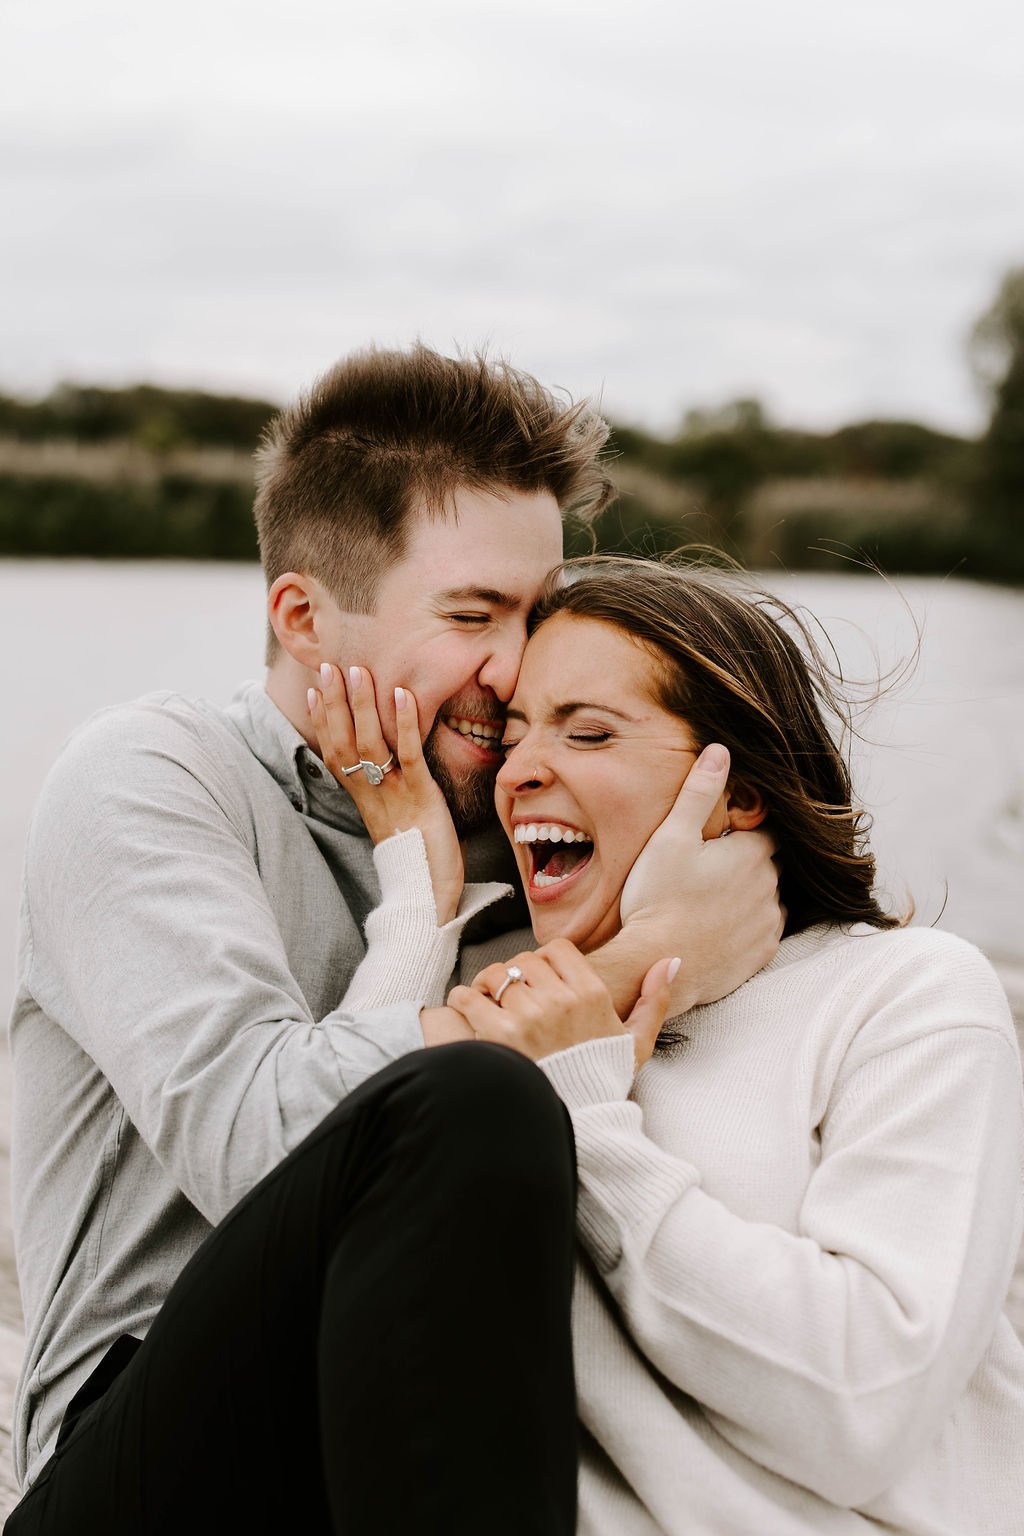 Engagement Photo Poses 101 from a Boston Photographer